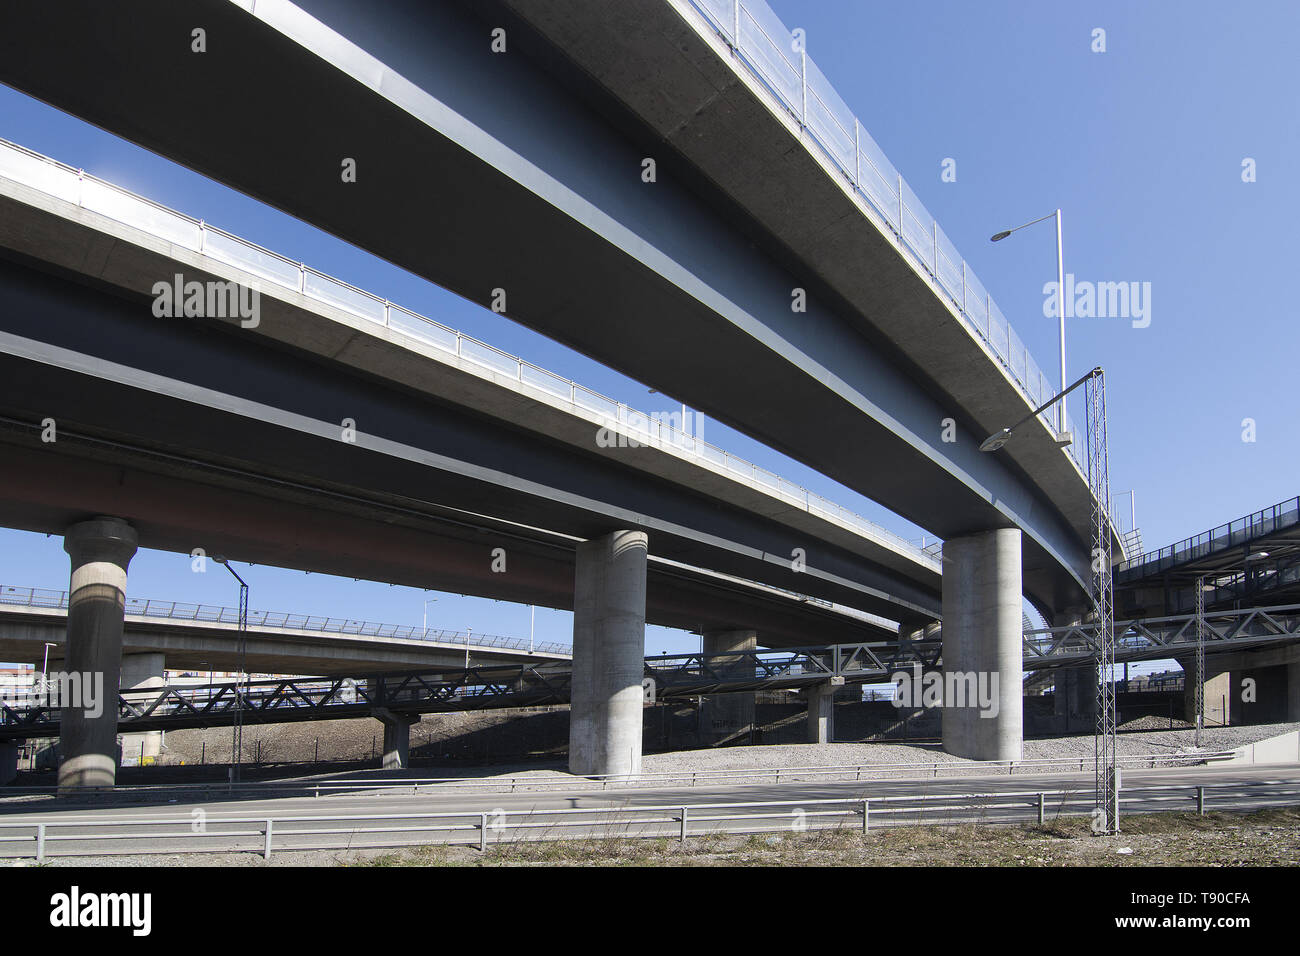 Bridge overpass with light, shadows and perspective under a trafficked lanes in central Stockholm, Sweden. Stock Photo